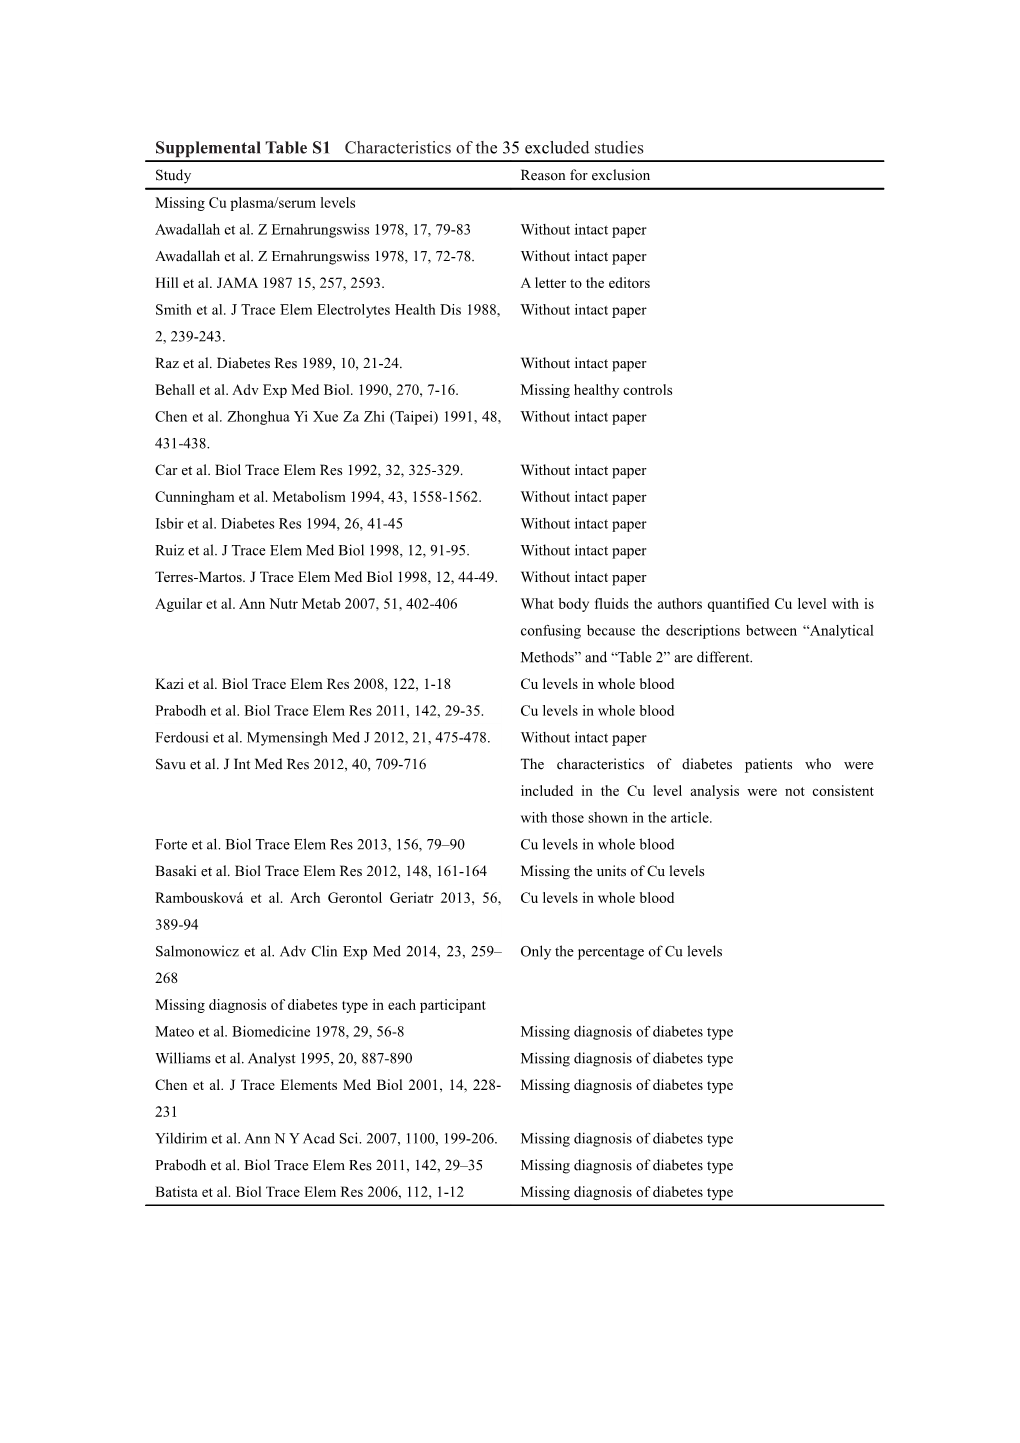 Supplemental Table S1 Characteristics of the 35 Excluded Studies